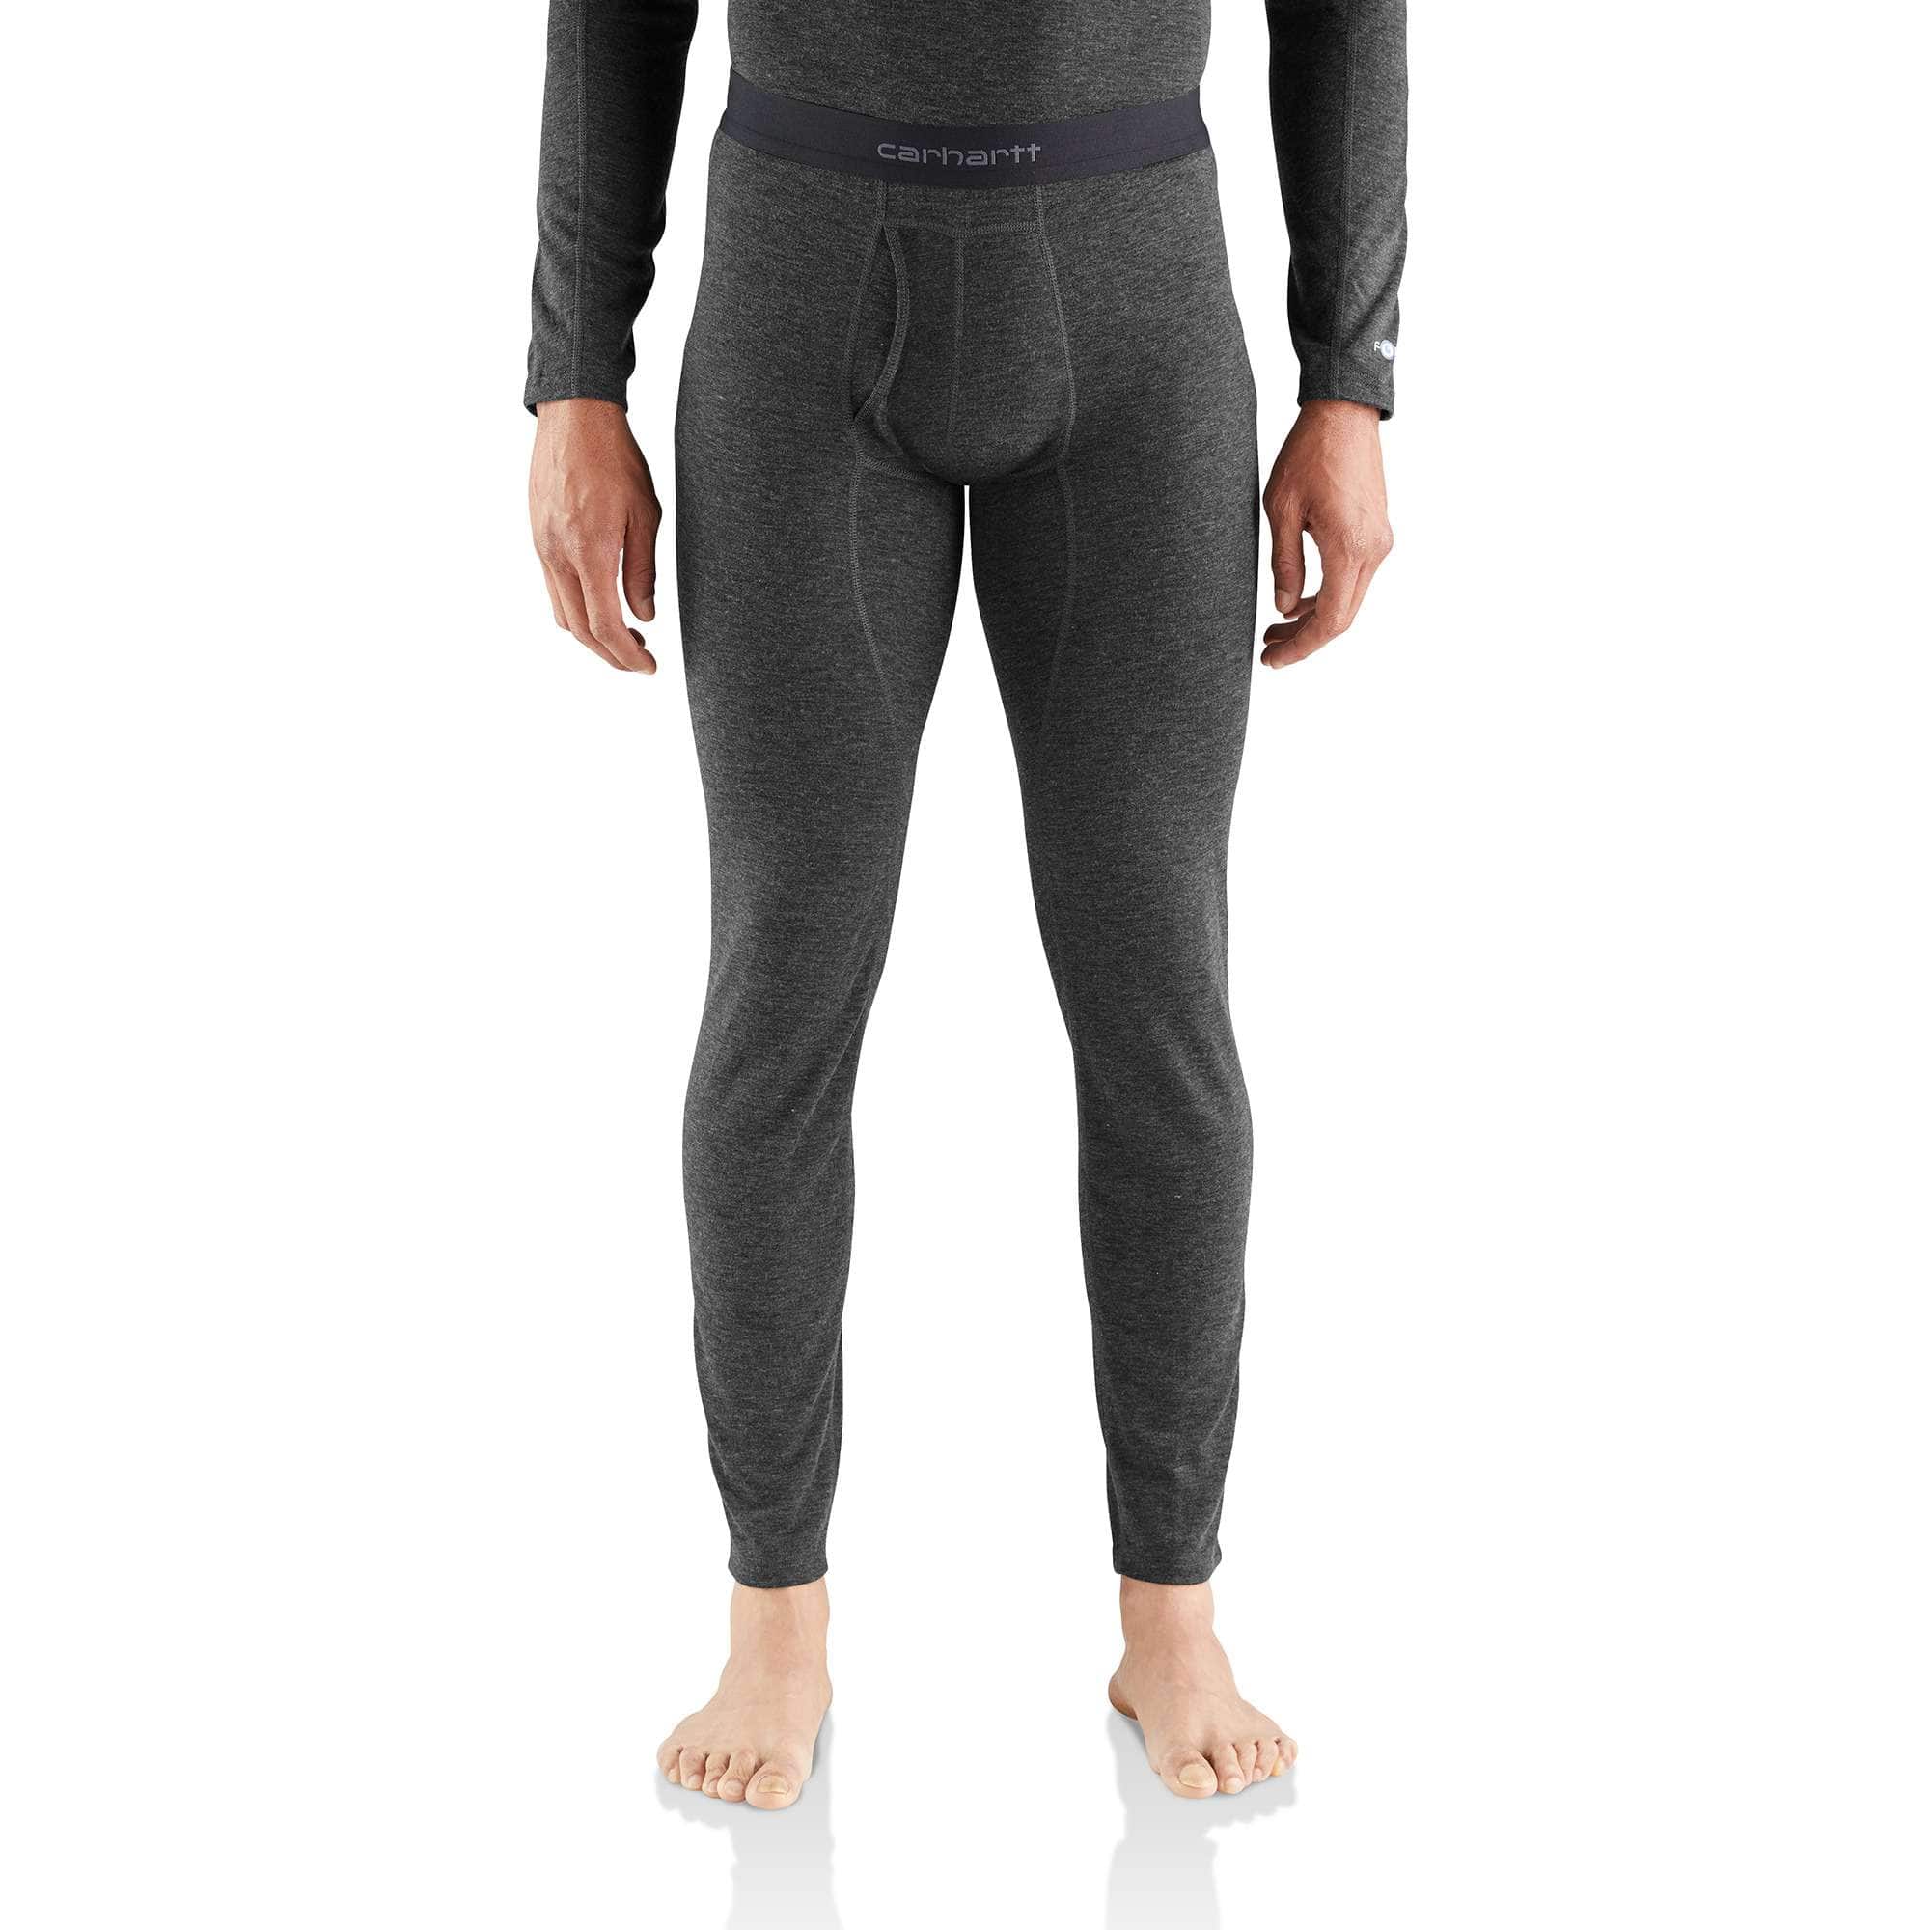 Men's Heavyweight Base Layers & Thermals